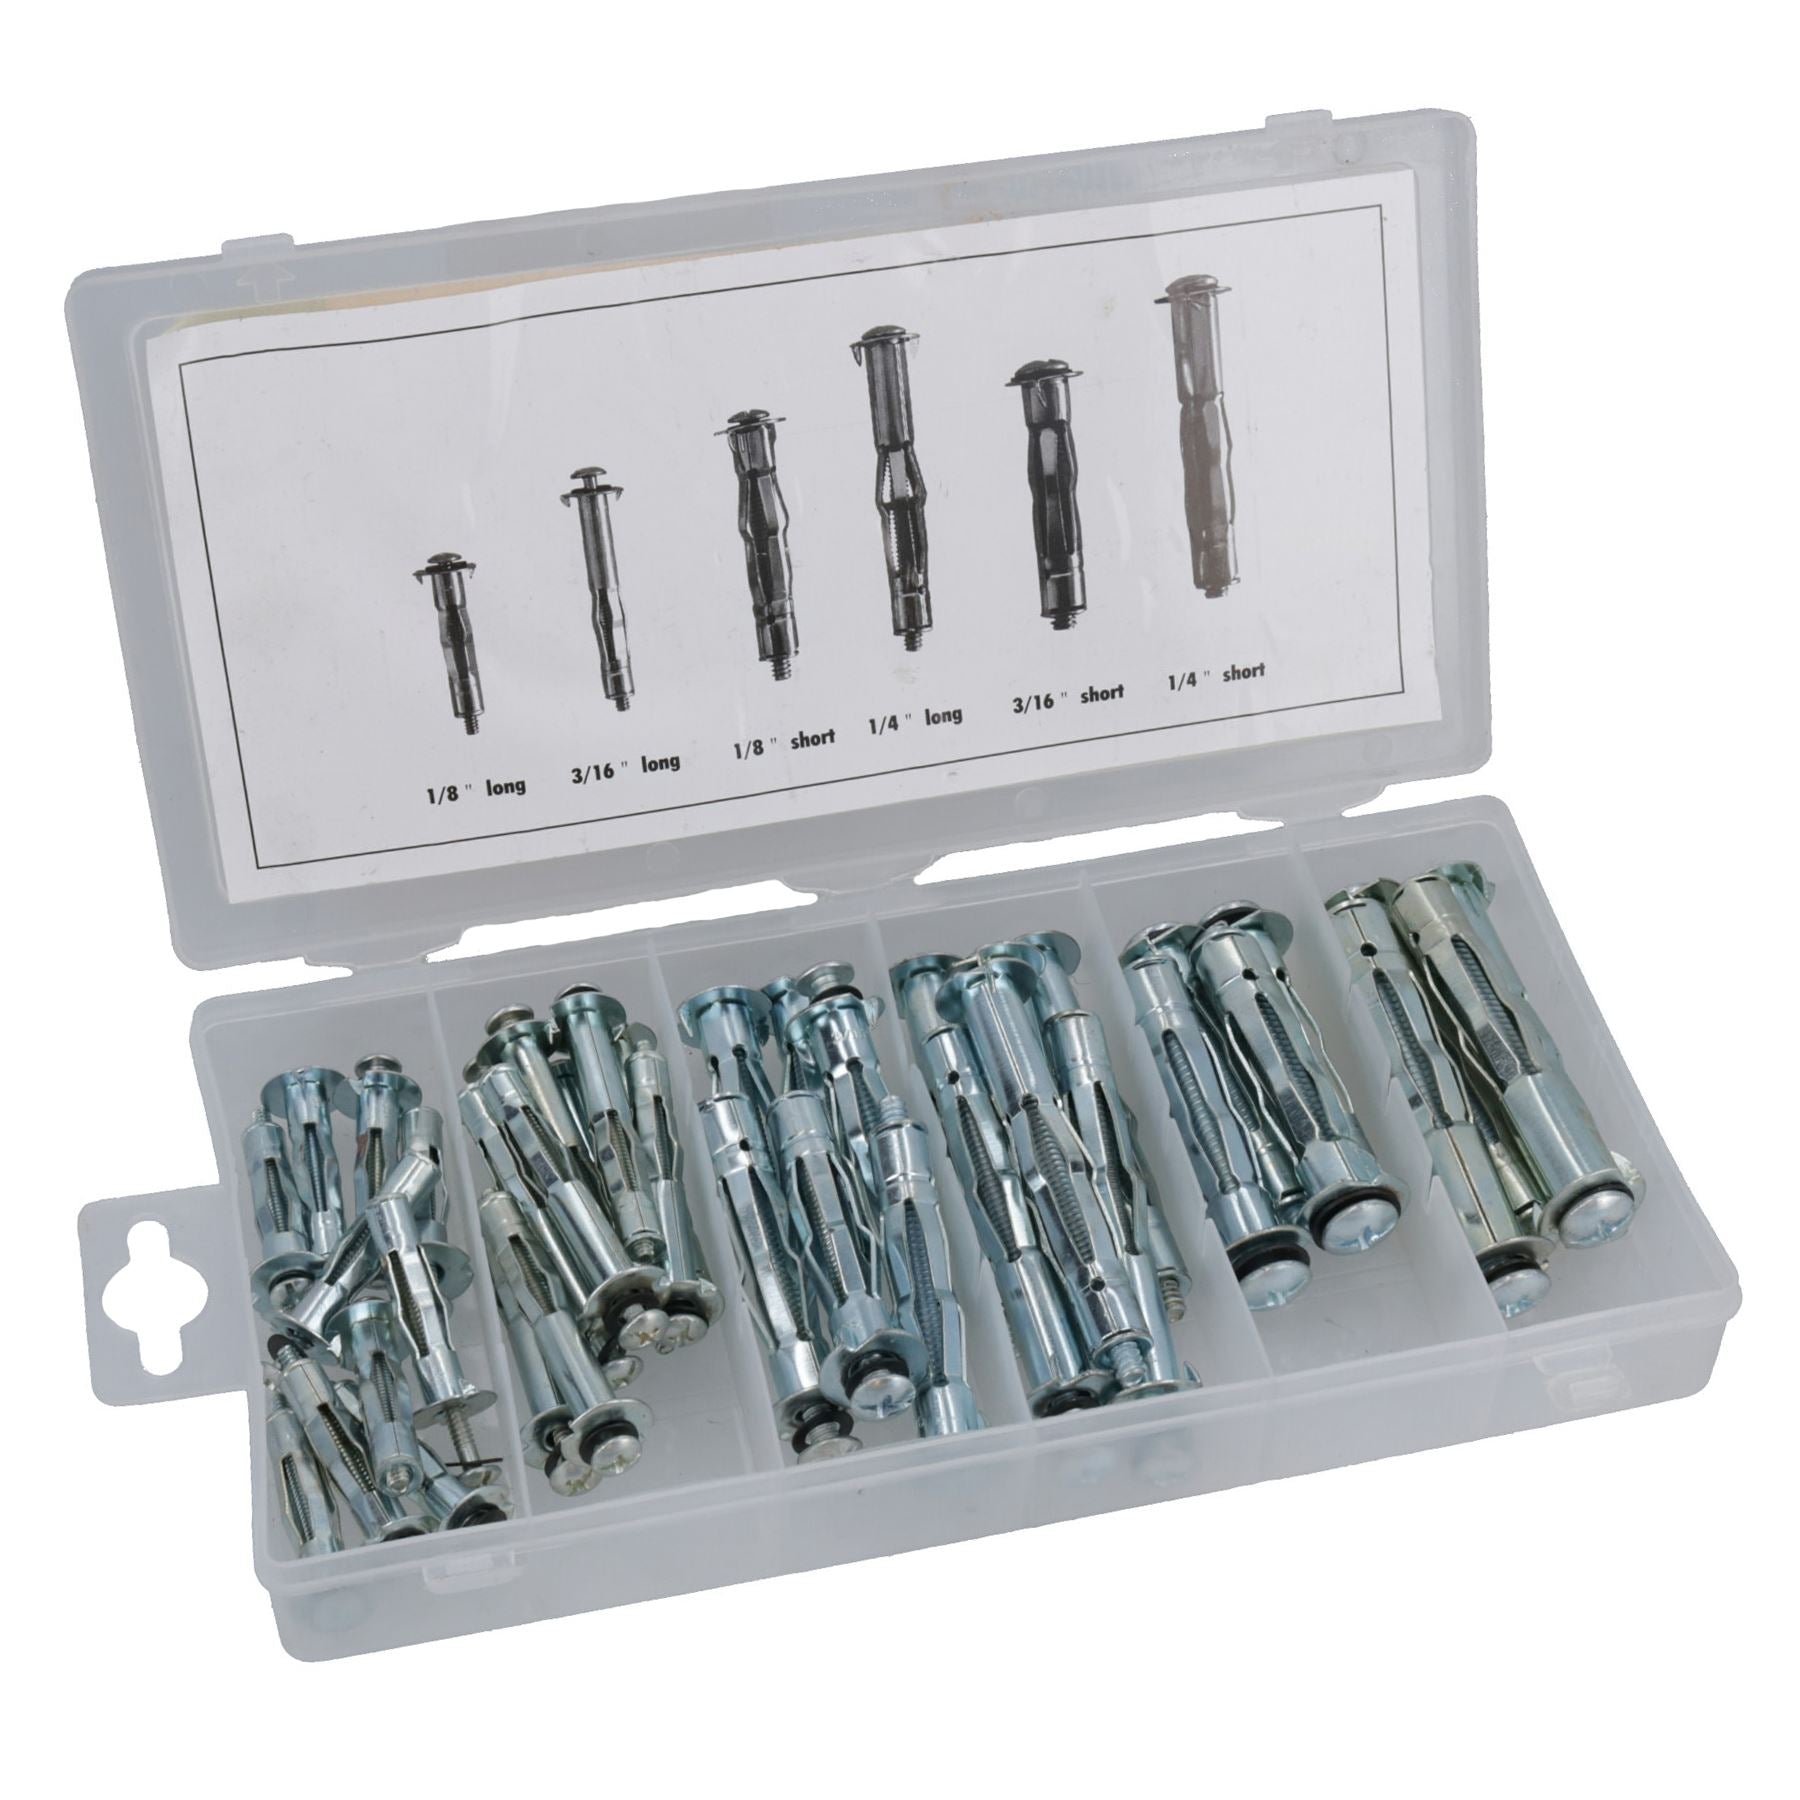 44pc Molly Bolt Hollow Wall Plasterboard Cavity Anchors Fasteners Assortment Set